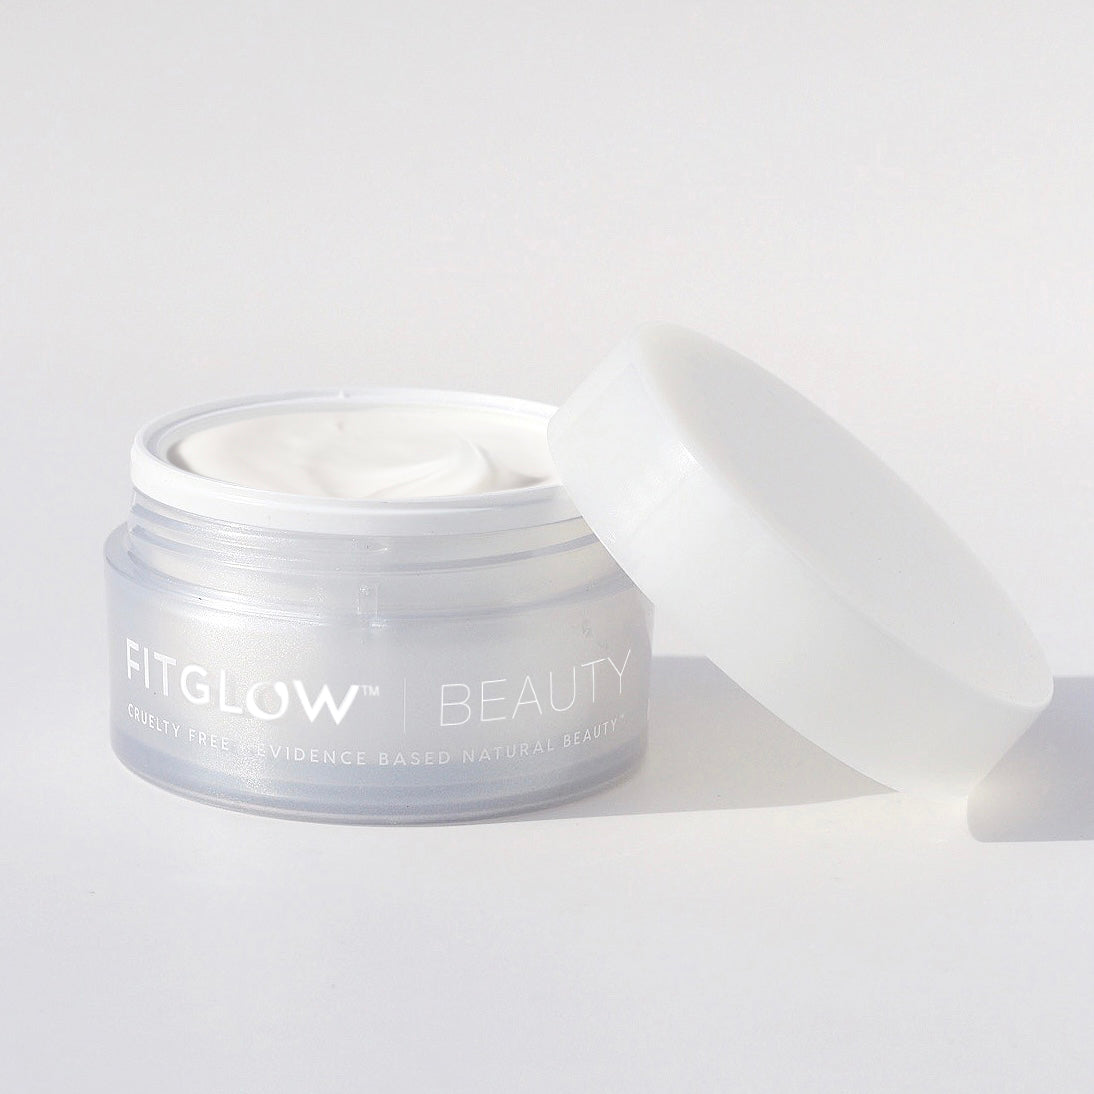 Fitglow Beauty Cloud Ceramide Balm at Socialite Beauty Canada